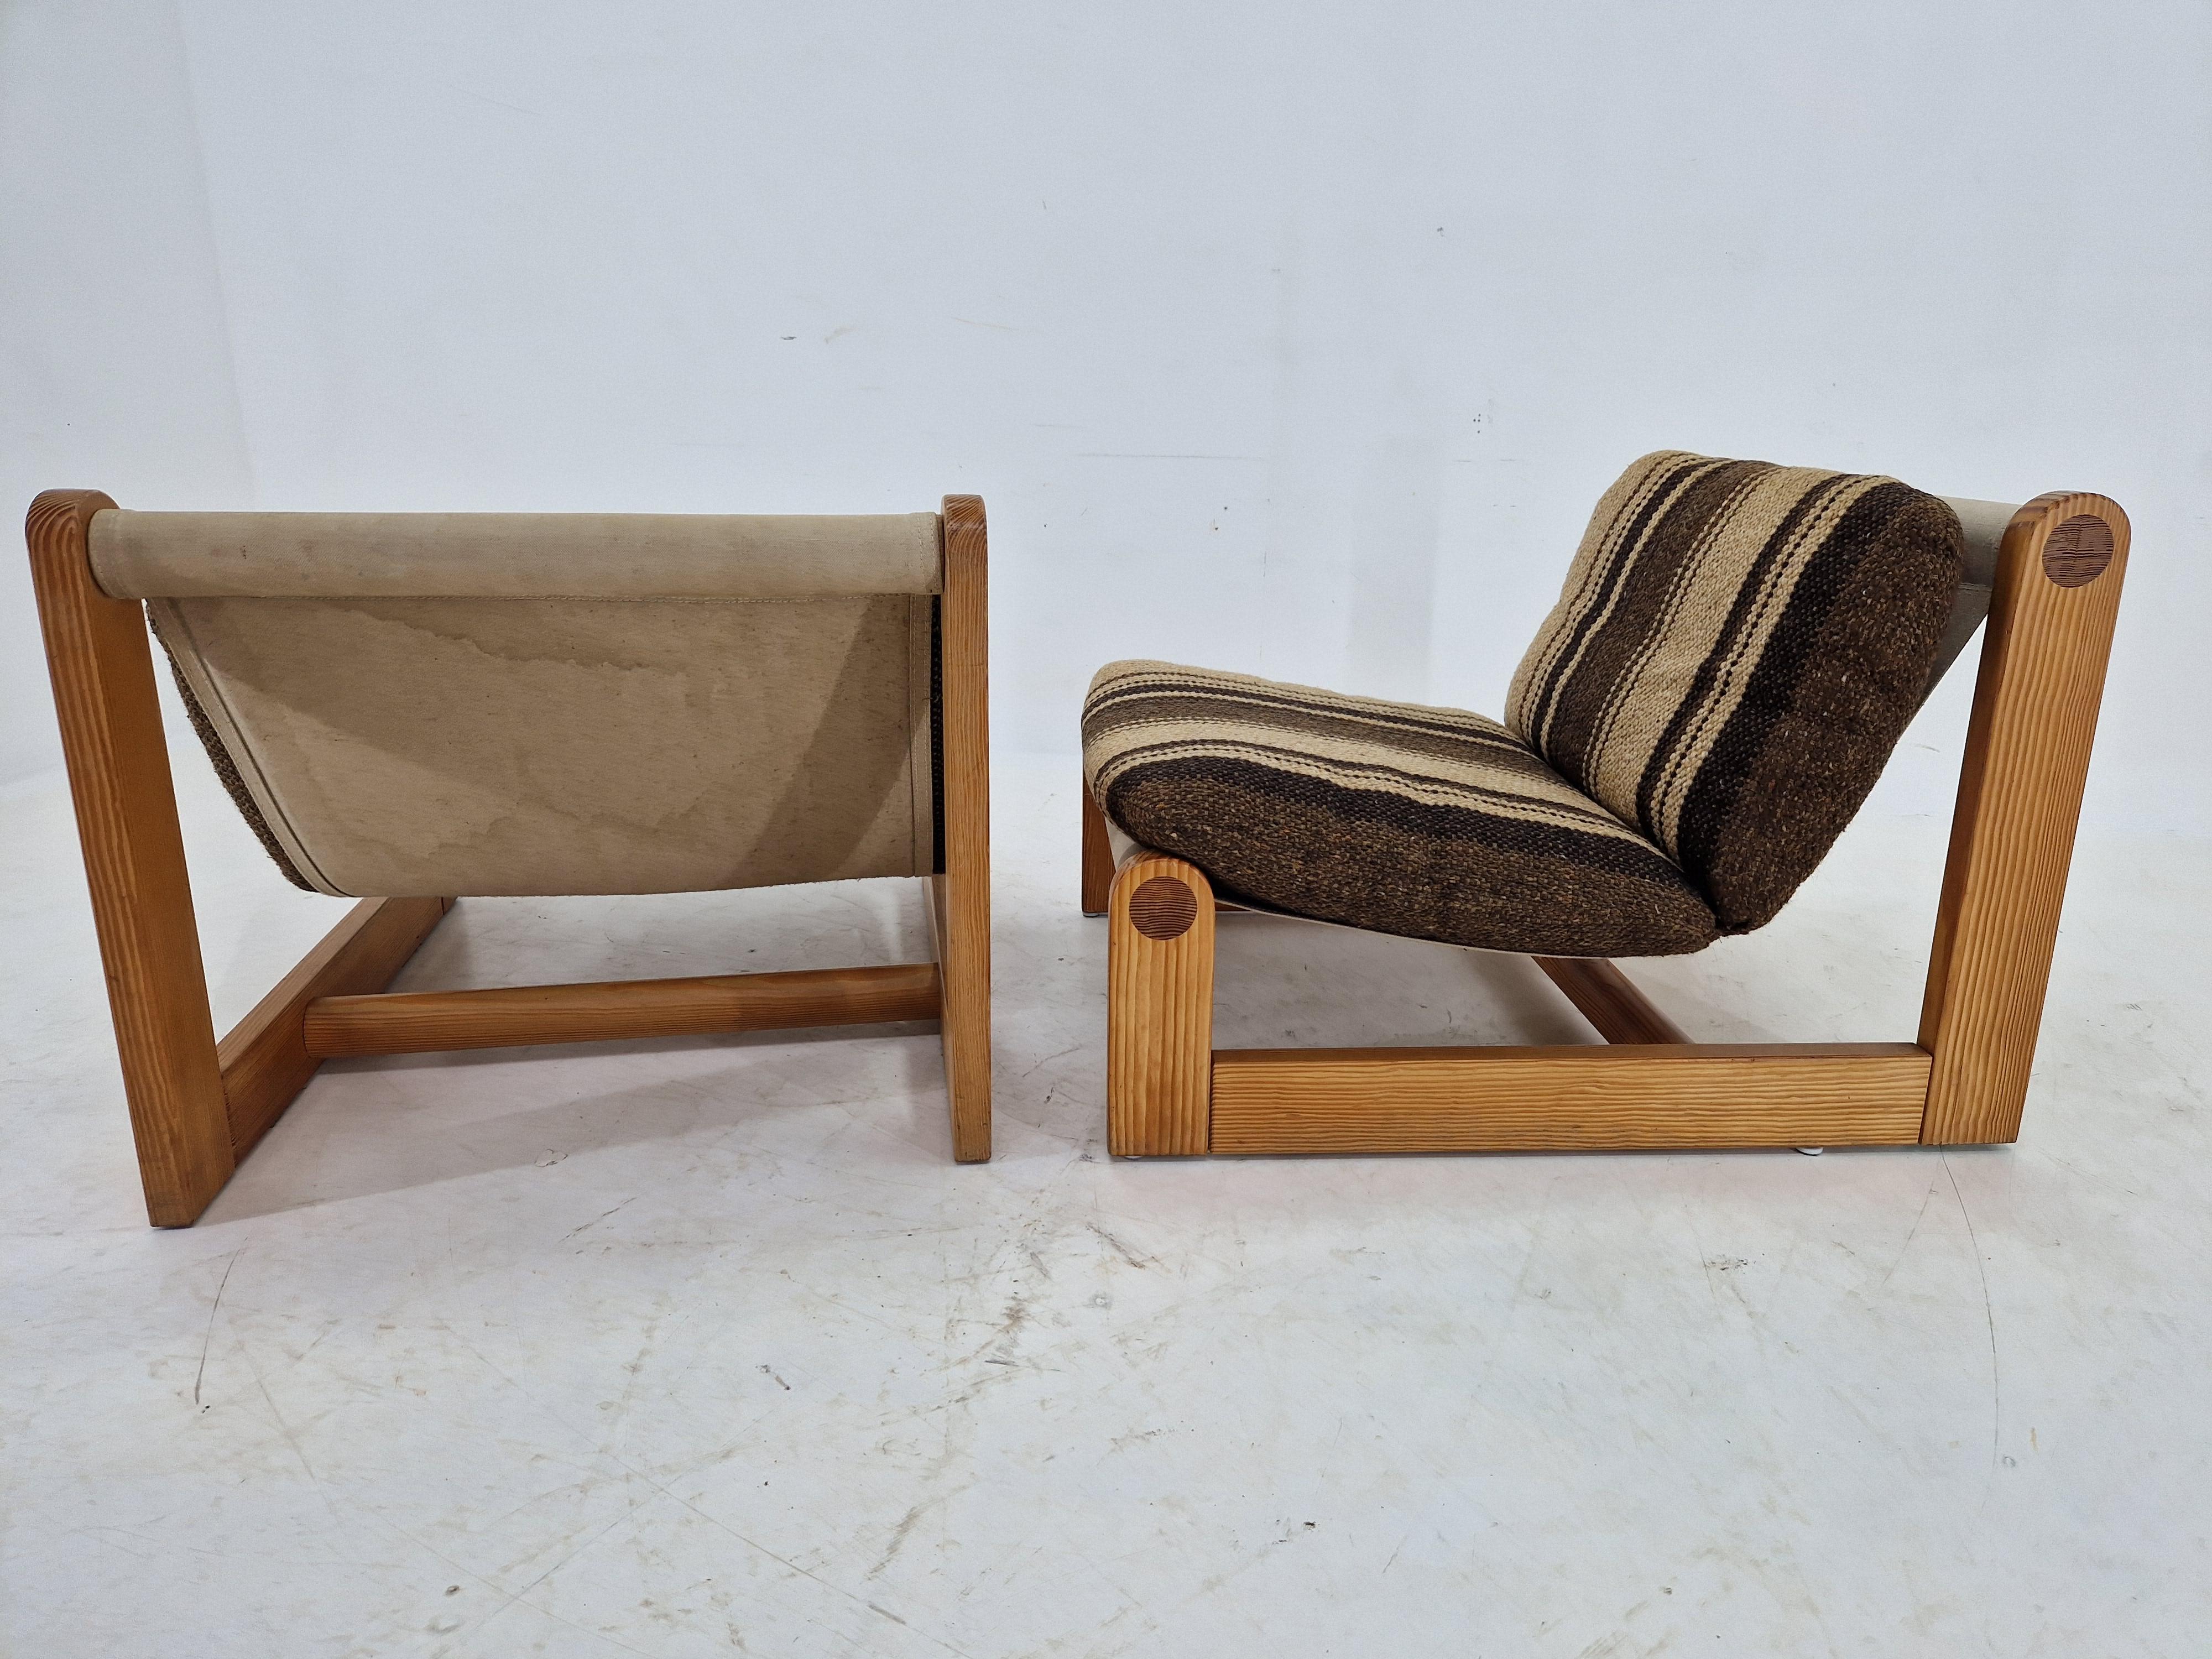 Pair of Midcentury Rare Lounge Chairs Pine Wood, Denmark, 1960s For Sale 4